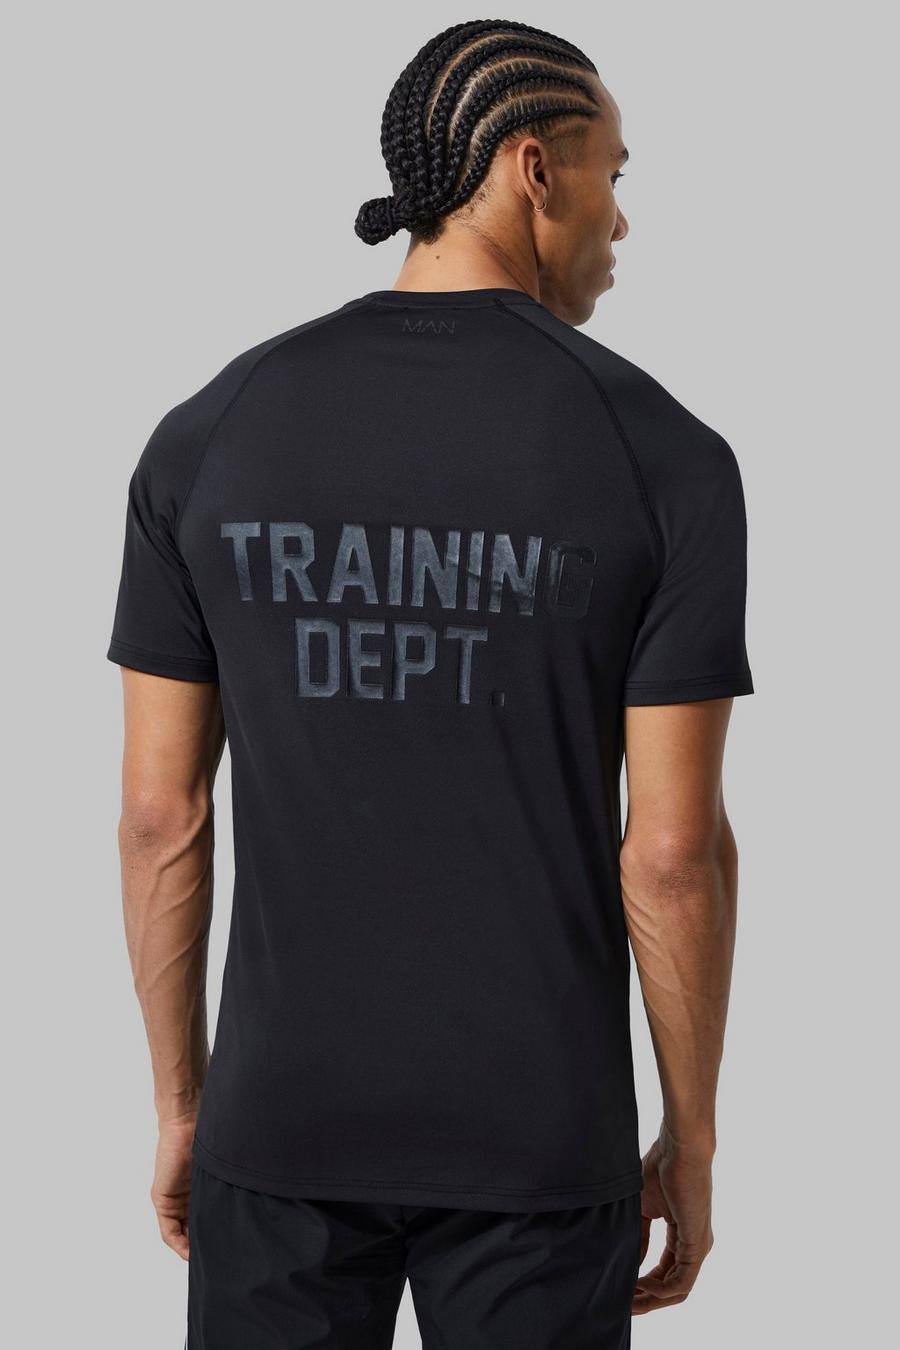 Black Tall Man Active Training Dept Muscle Fit T-shirt